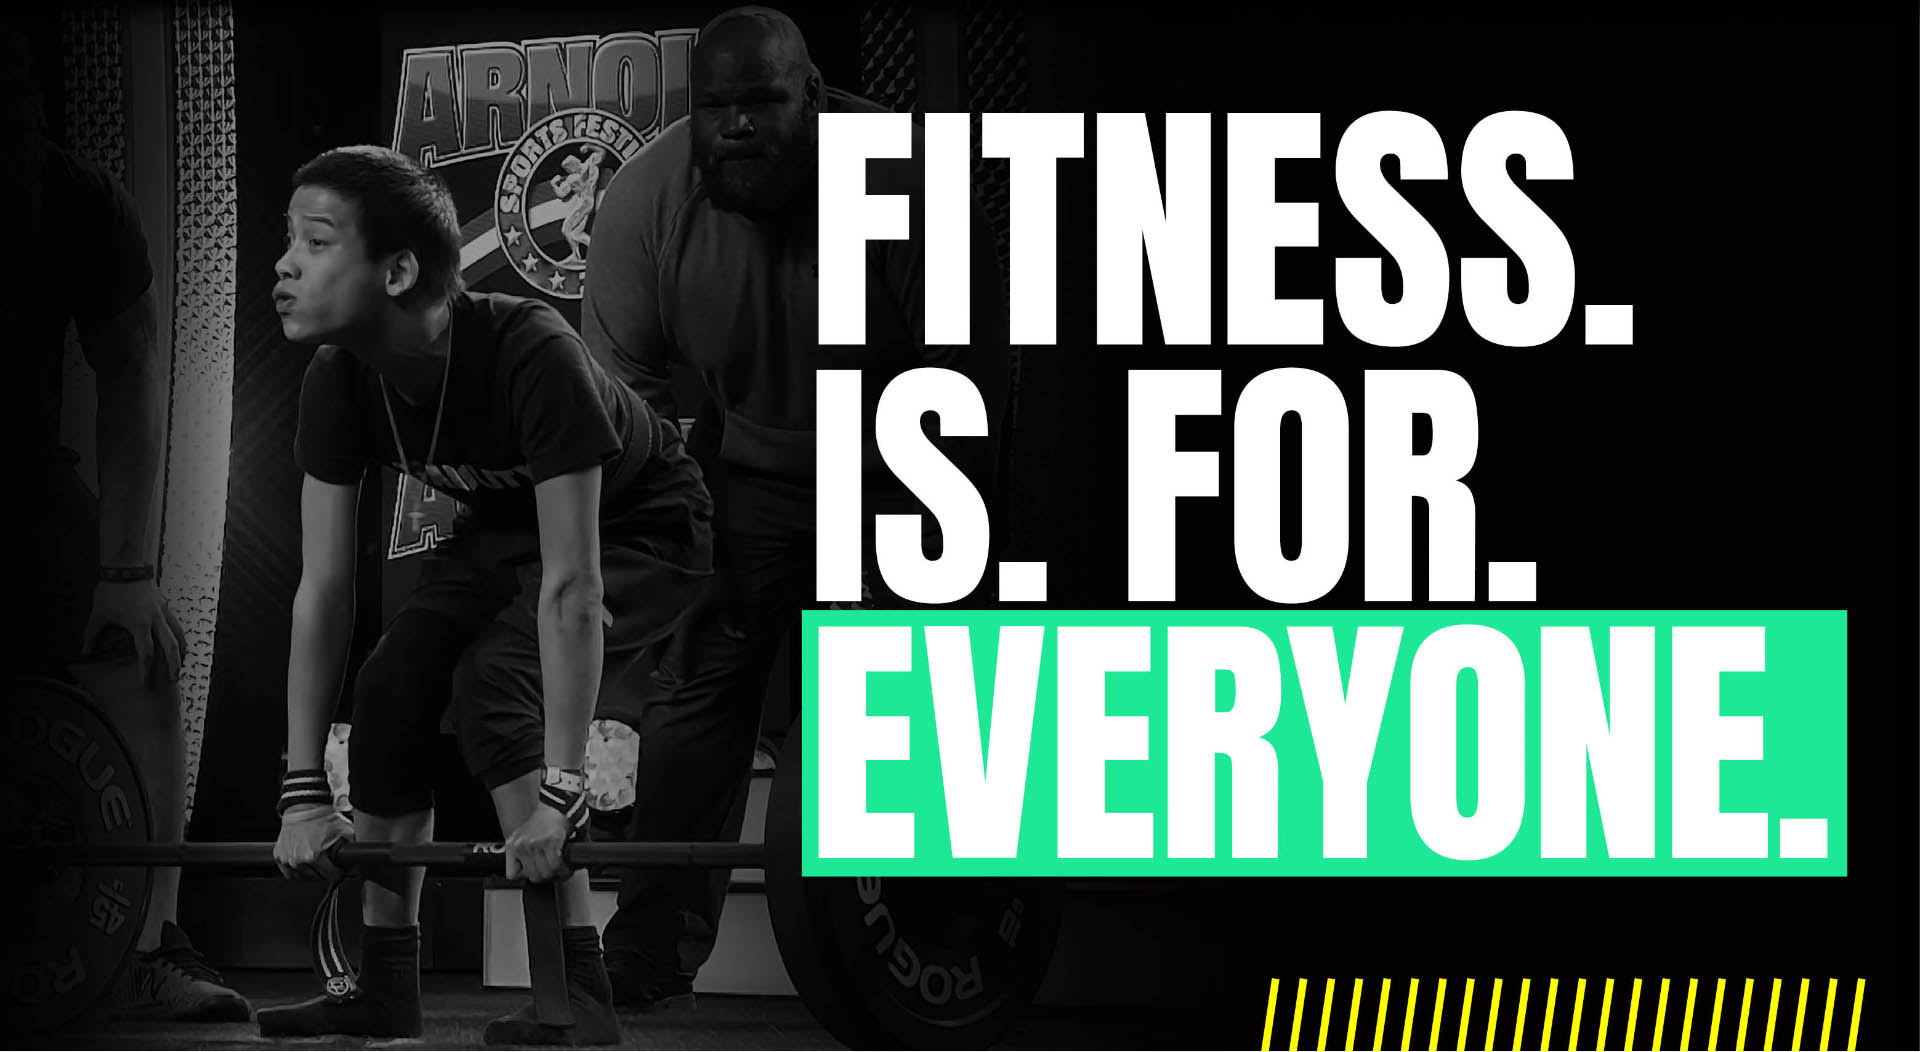 Arnold Sports Festival Fitness Is For Everyone tagline